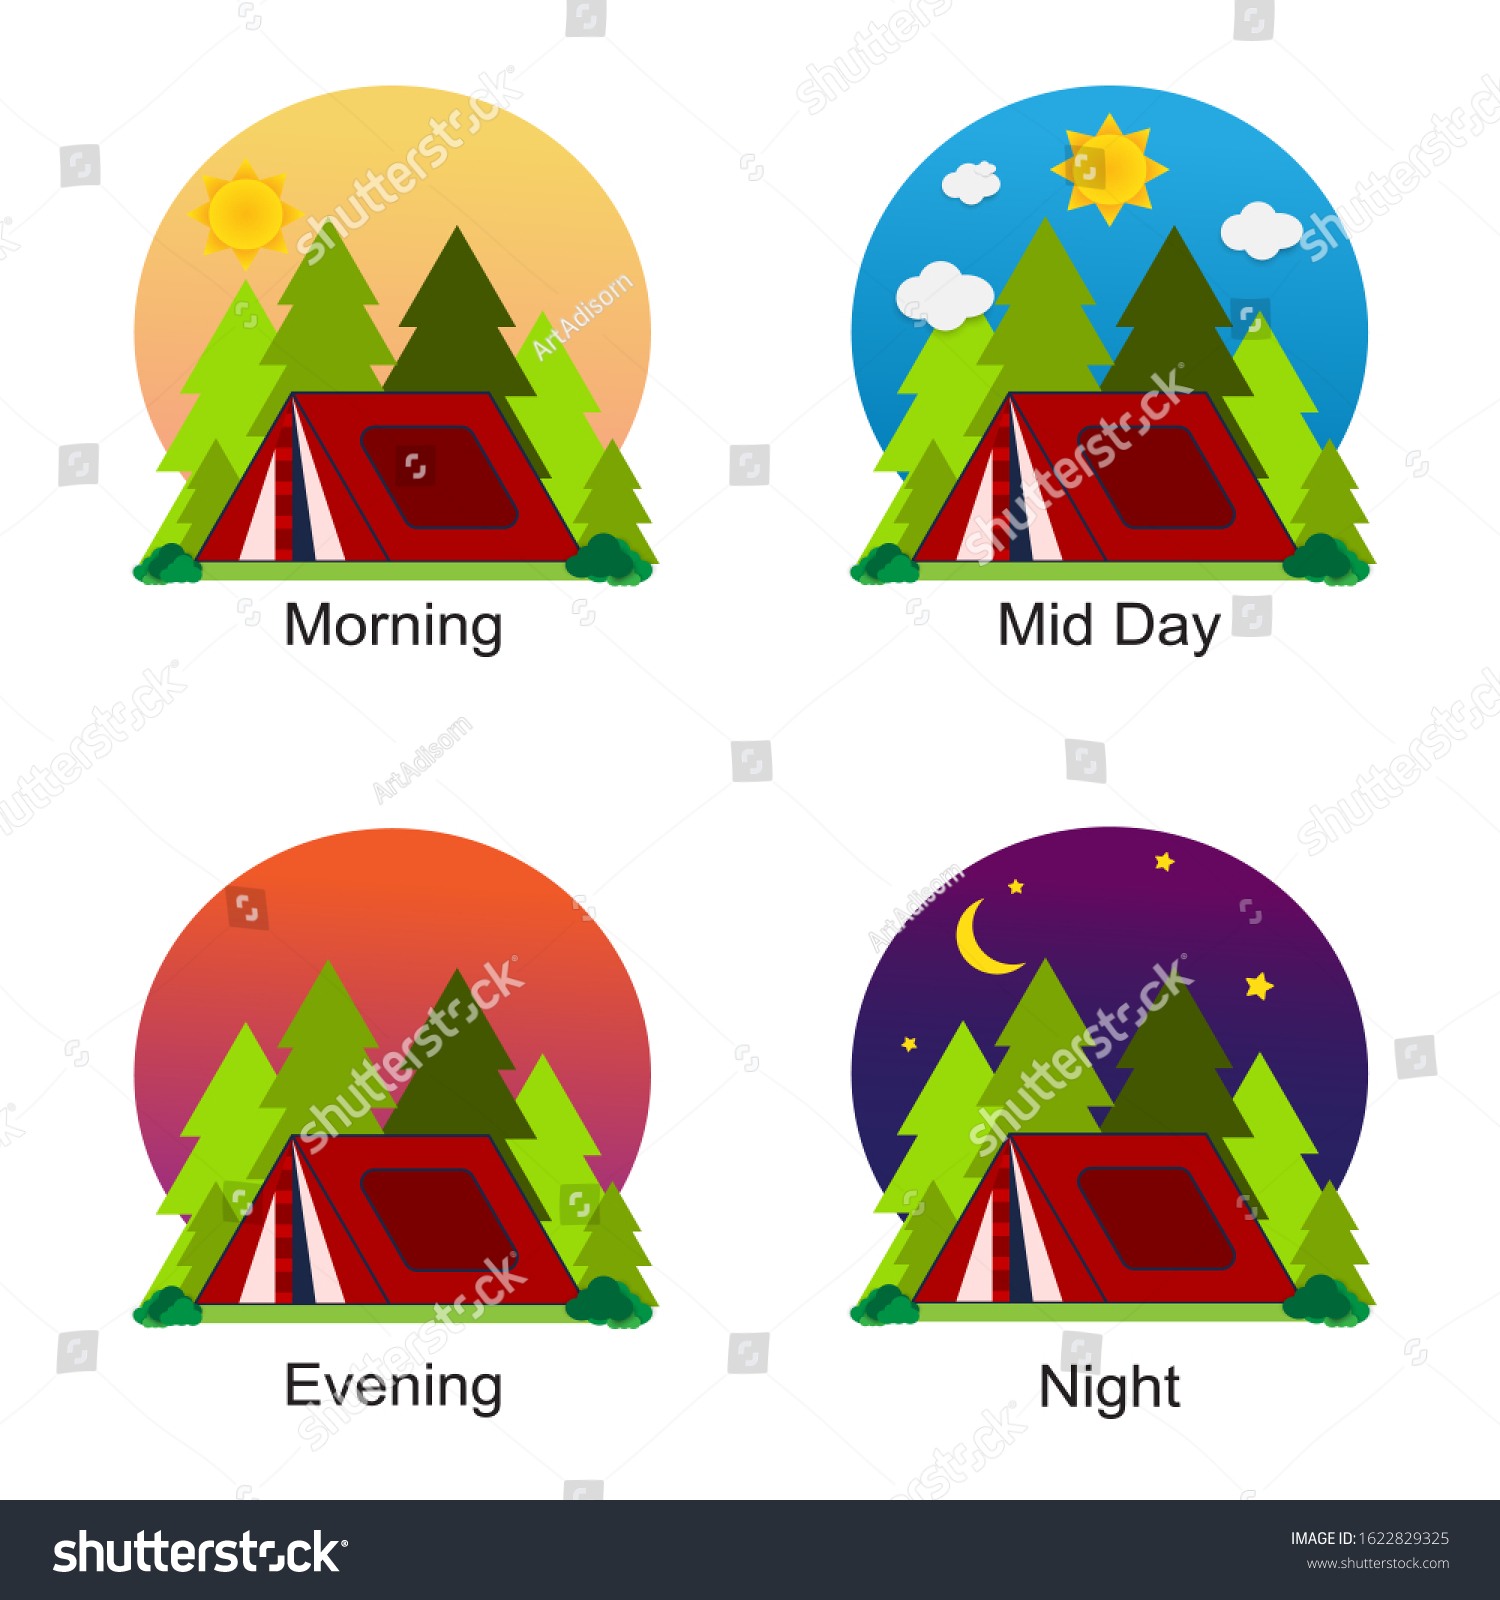 34,053 Four time a day Images, Stock Photos & Vectors | Shutterstock